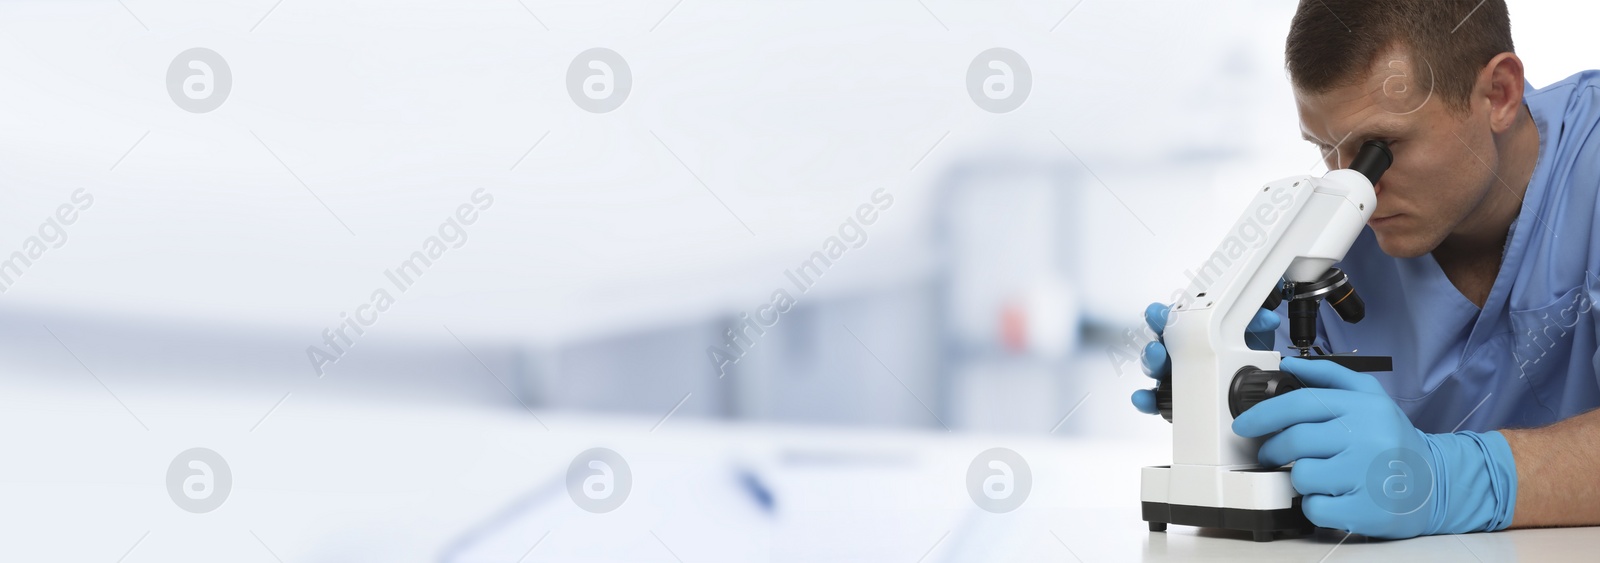 Image of Laboratory assistant using microscope indoors, space for text. Health care worker